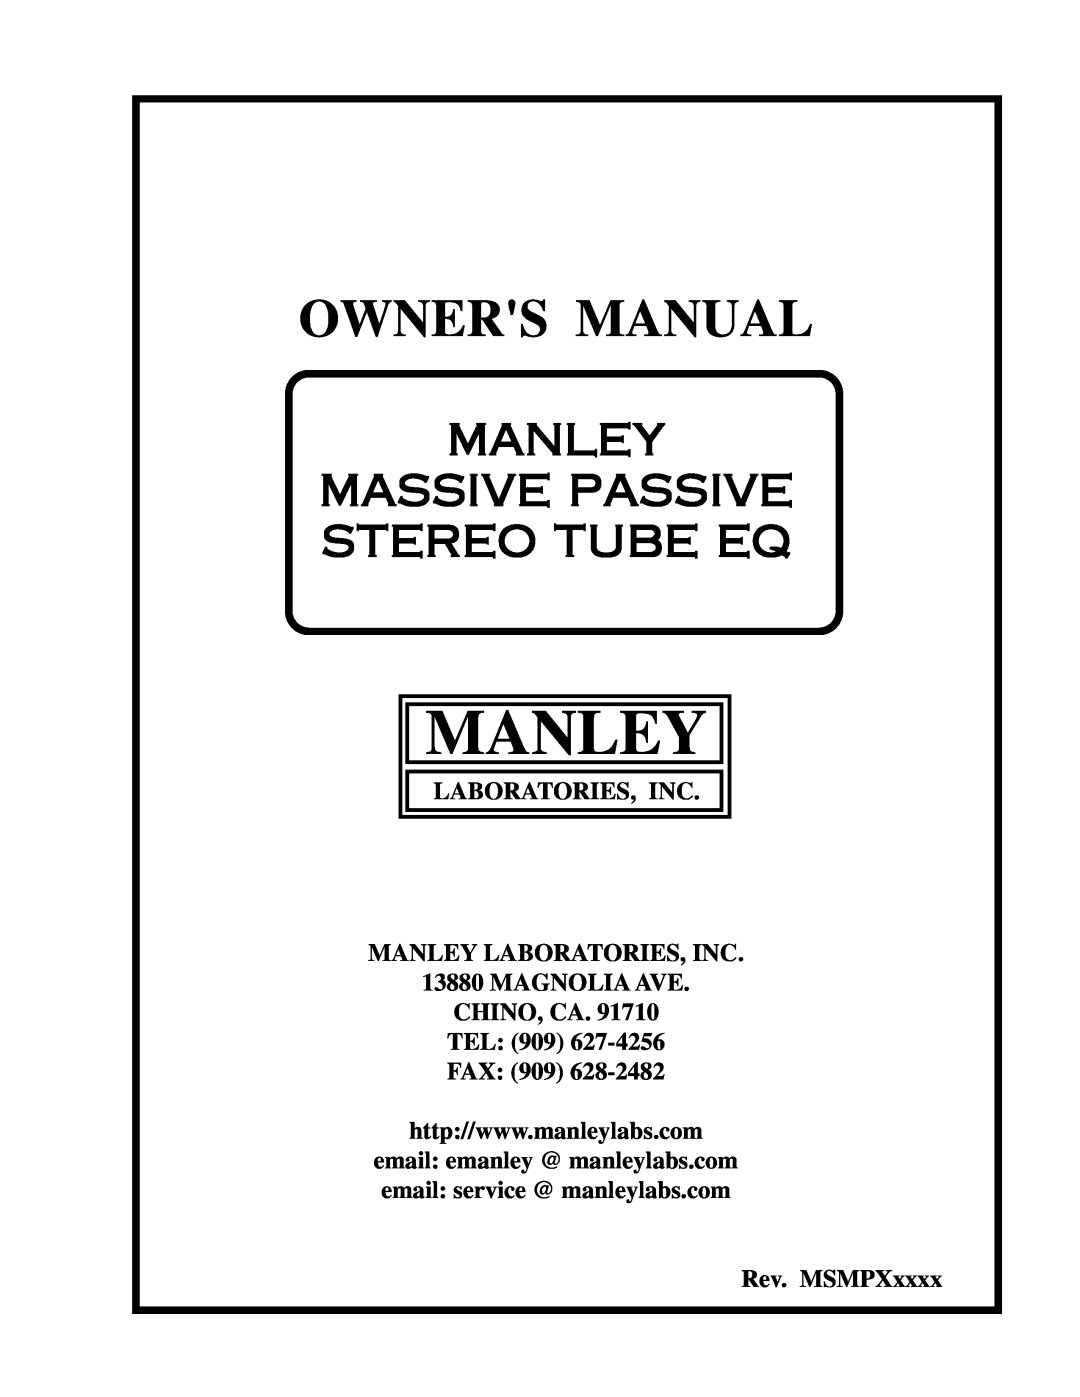 Manley Labs Manley Massive Passive Stereo Tube Equalizer owner manual Laboratories, Inc Manley Laboratories, Inc 